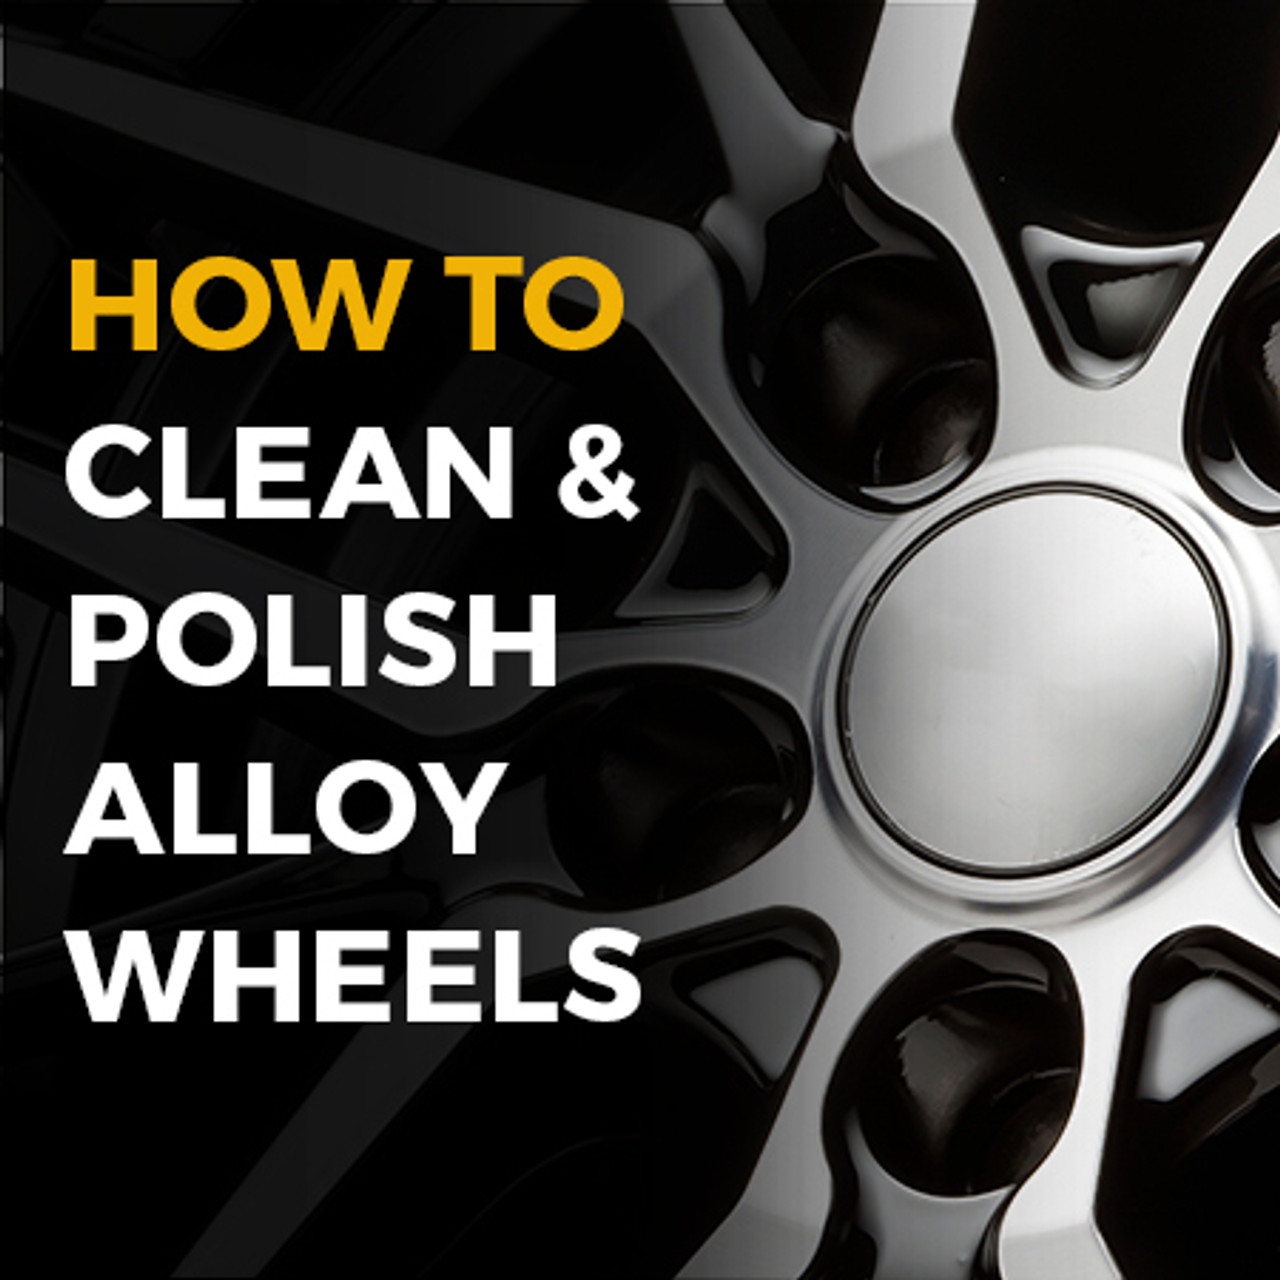 How To Clean and Polish Alloy Wheels